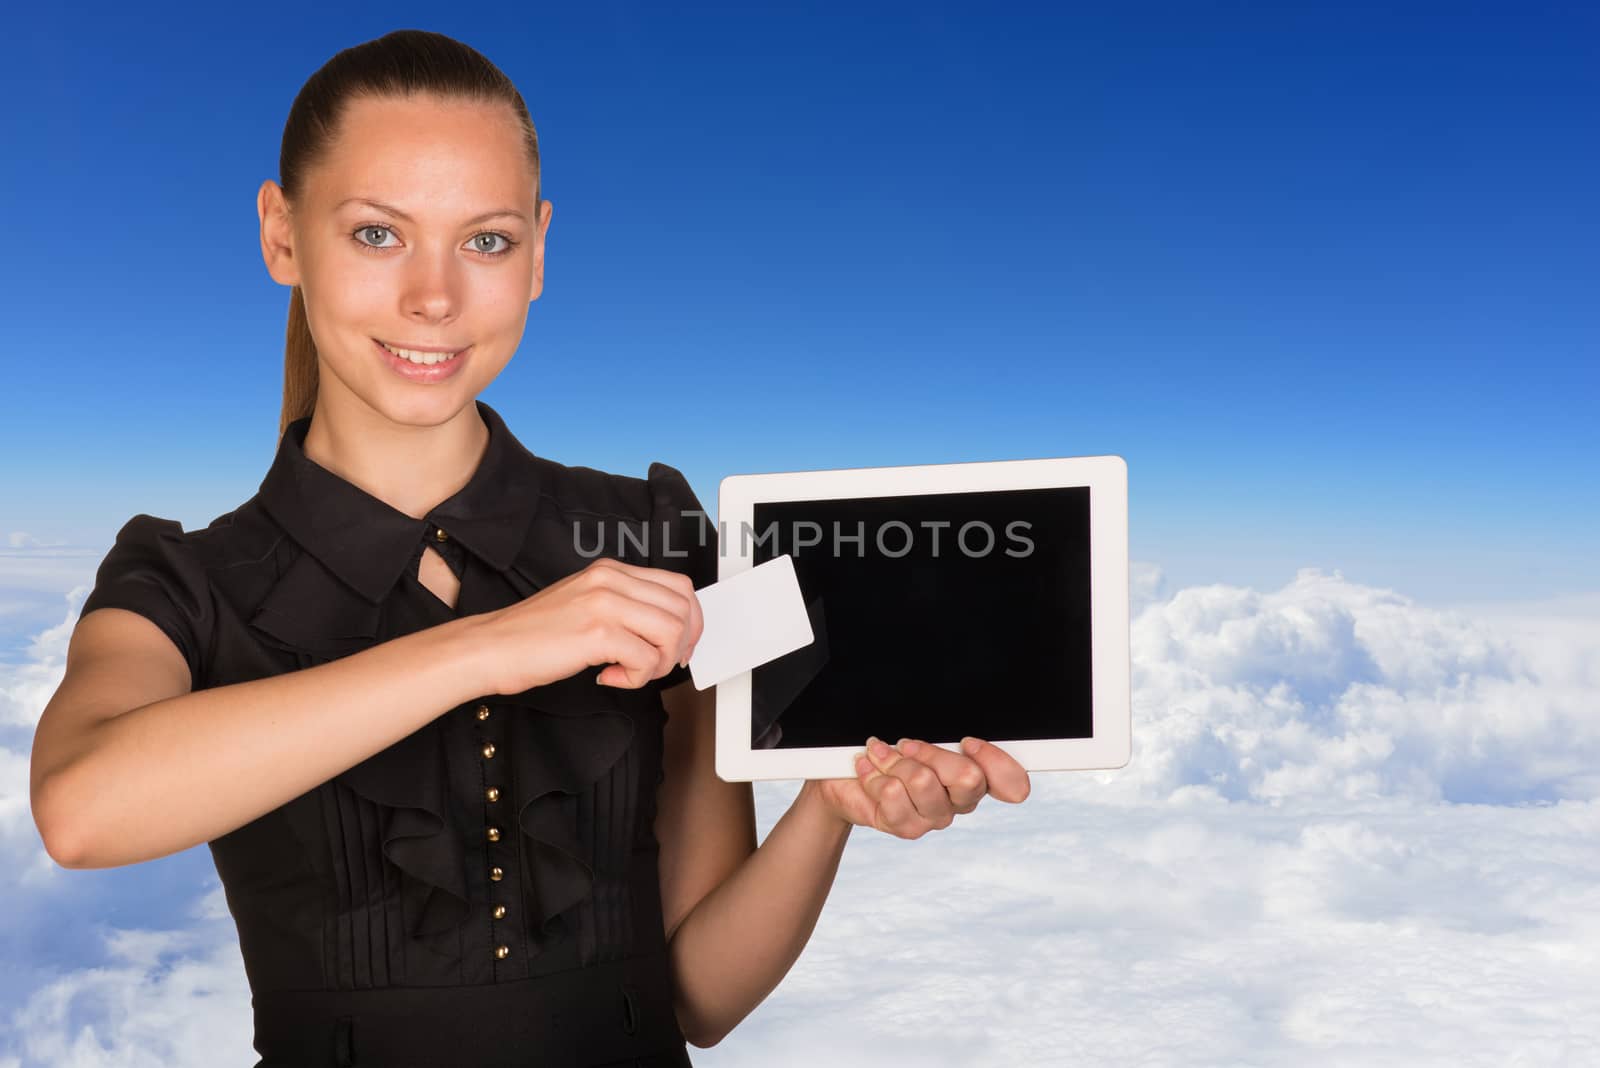 Beautiful businesswoman holding blank tablet PC and blank business card in front of PC screen. Blue sky and cloud layer as backdrop